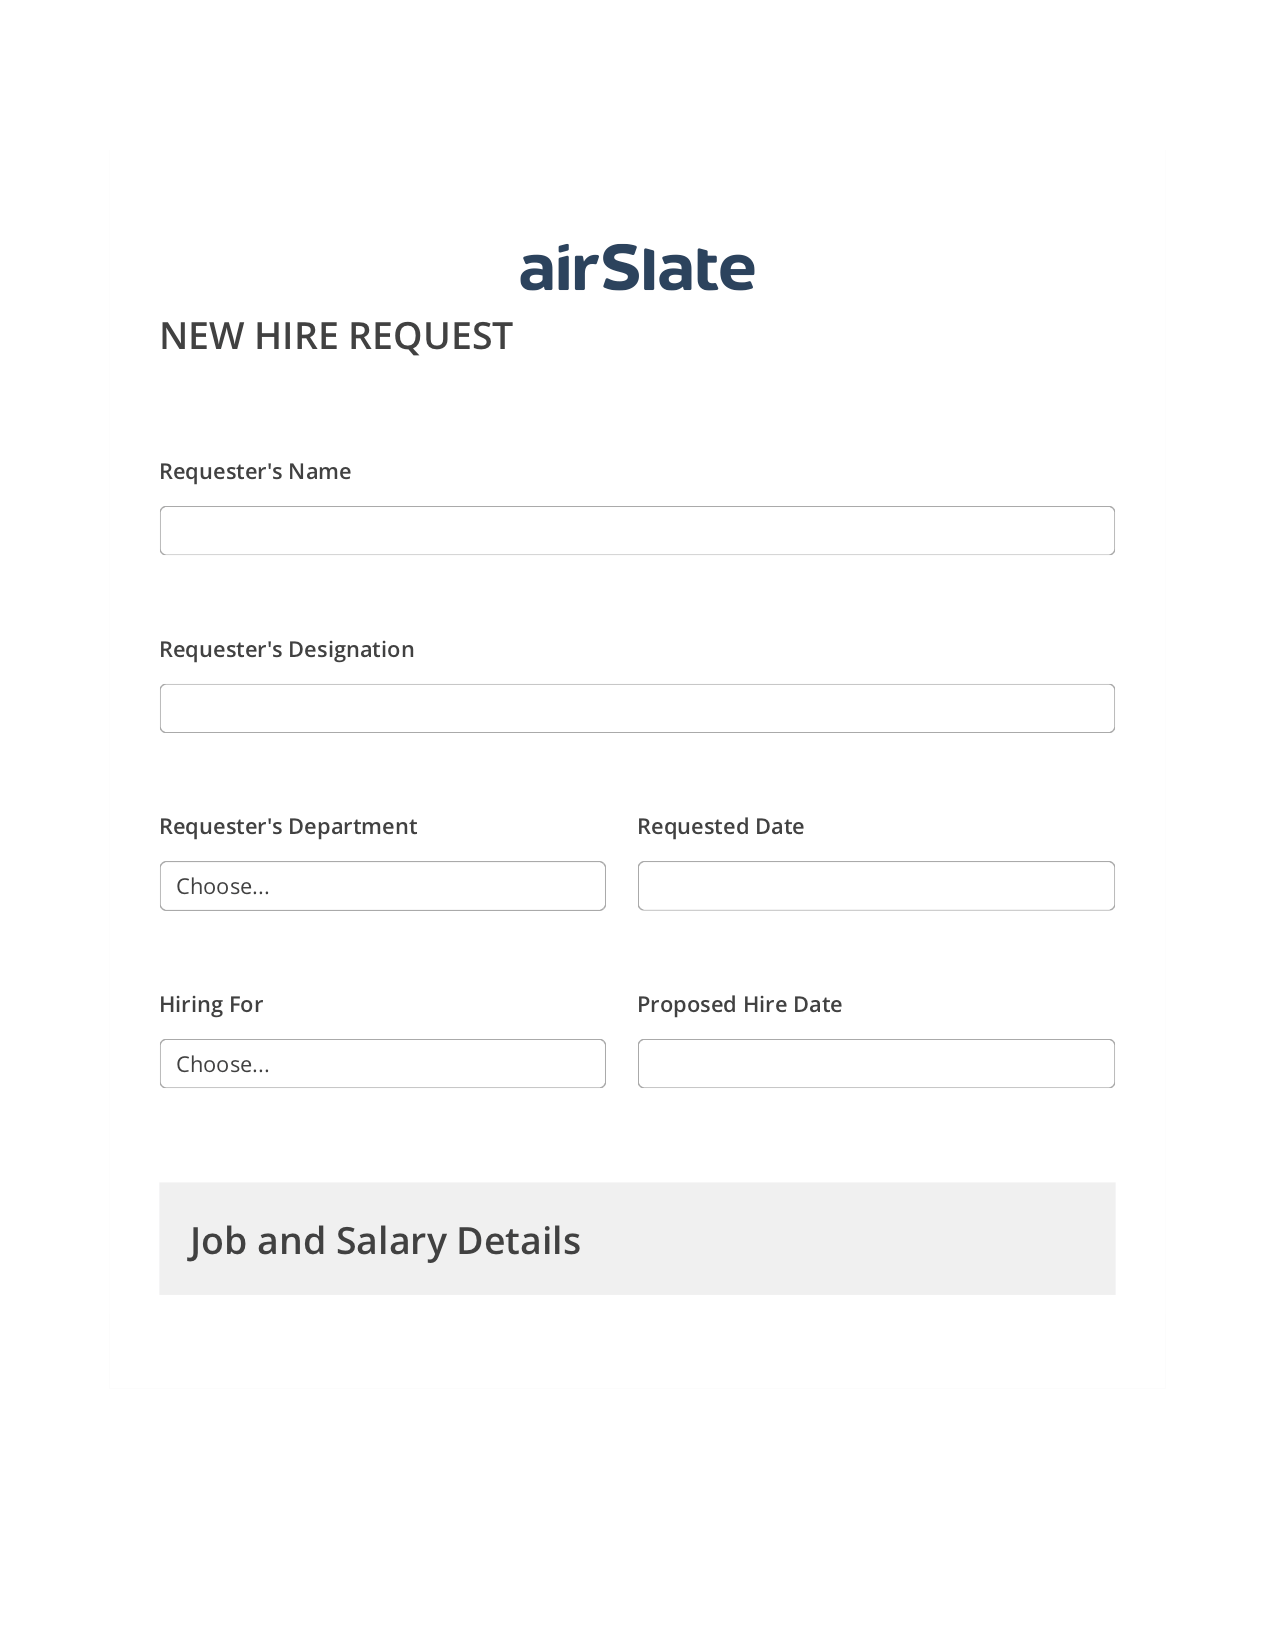 Multirole Hiring Request Workflow Pre-fill from another Slate Bot, Lock the Slate Bot, Archive to Box Bot